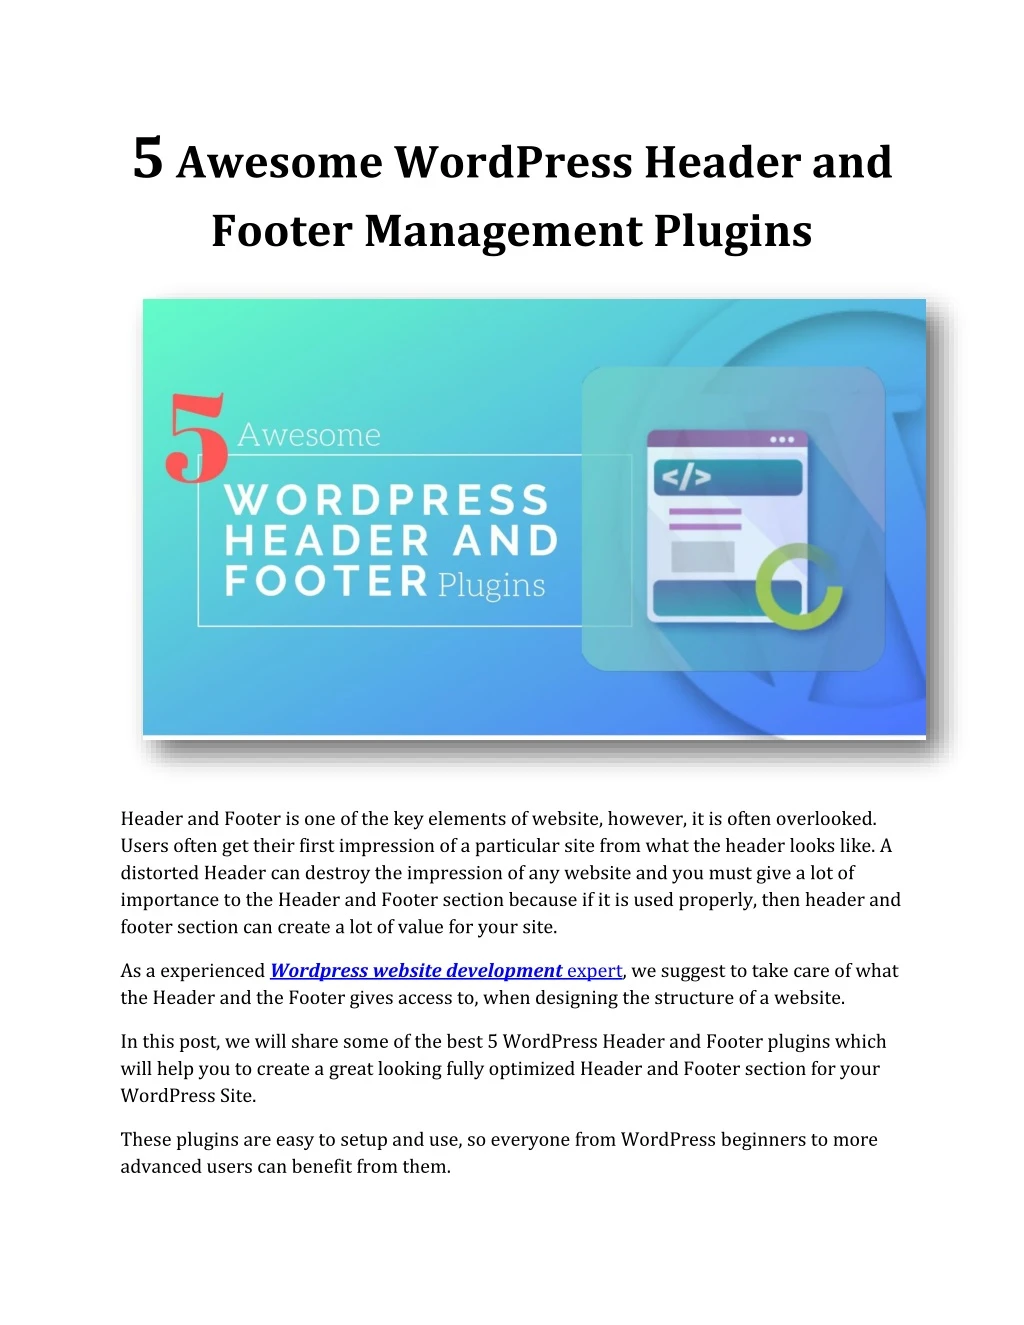 5 awesome wordpress header and footer management